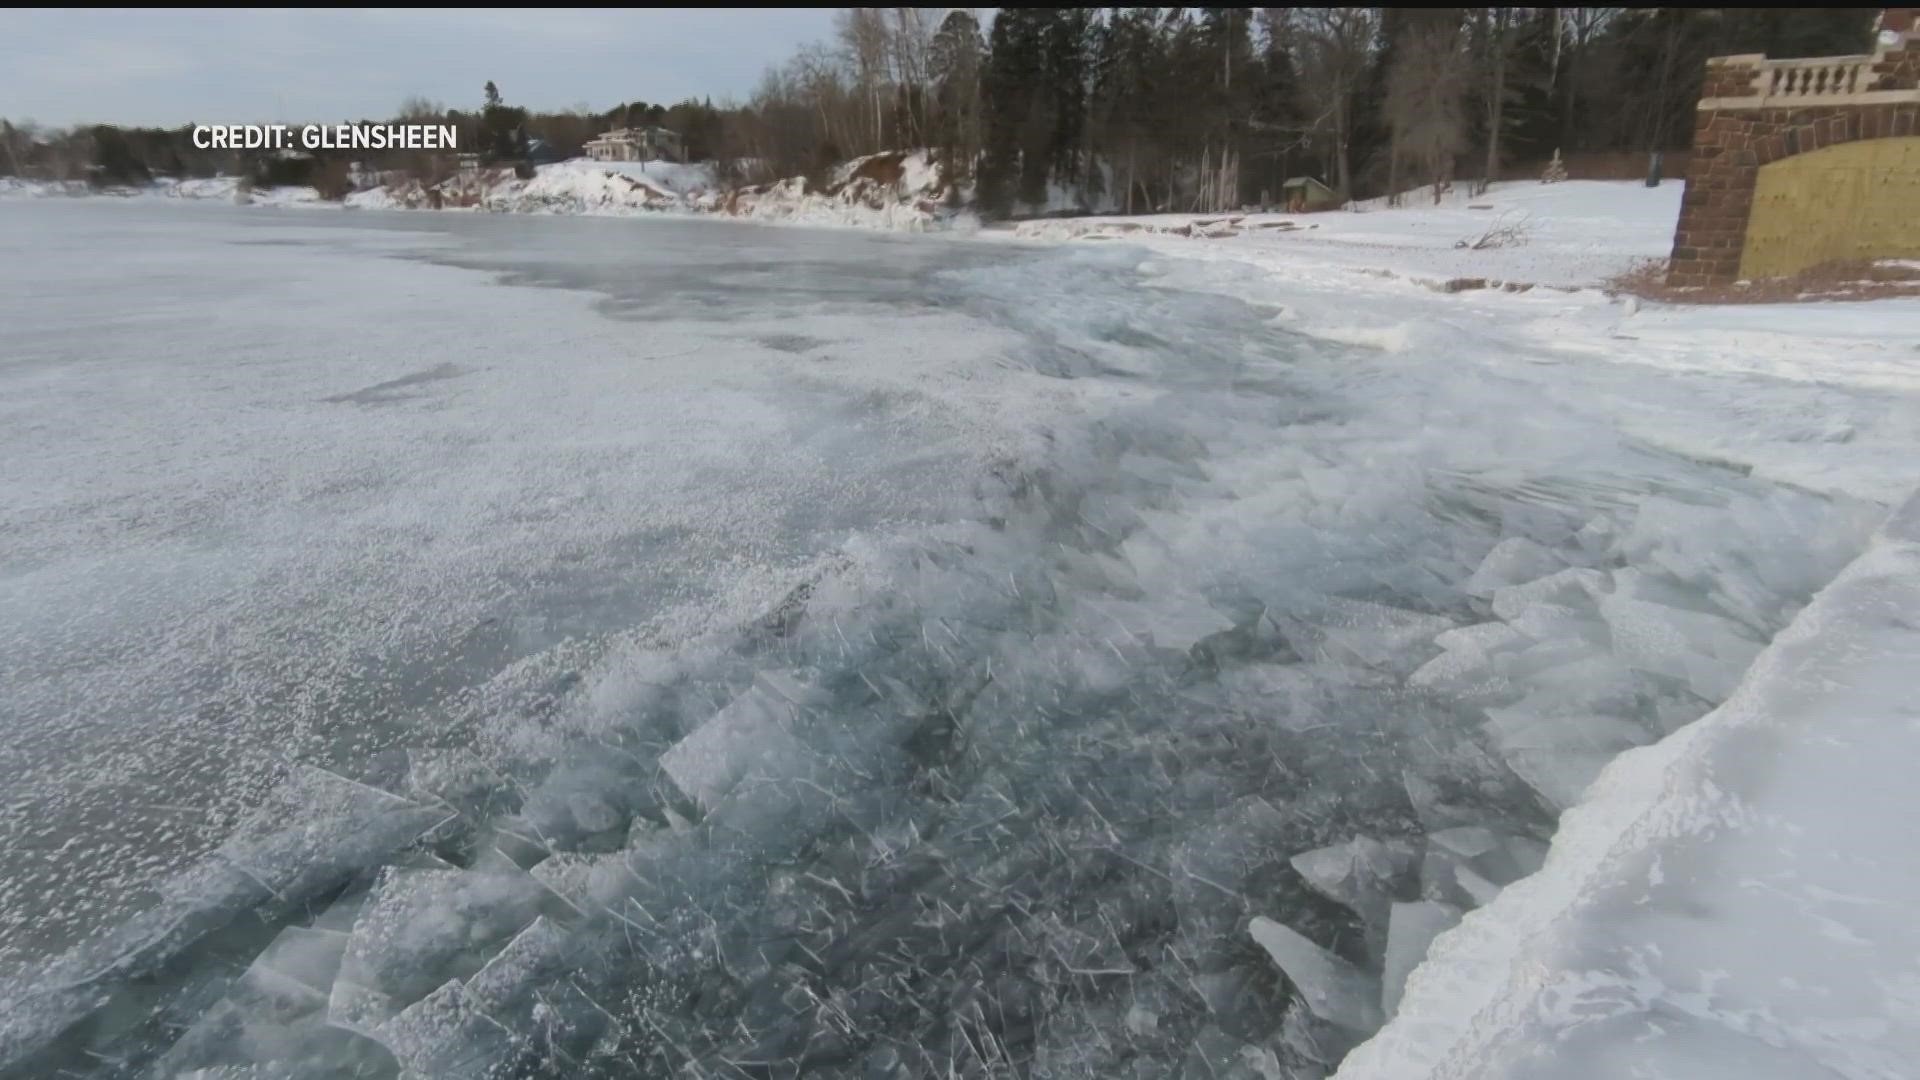 Lake Superior pushes a thin layer of ice onto the shoreline by Glensheen Mansion in Duluth.